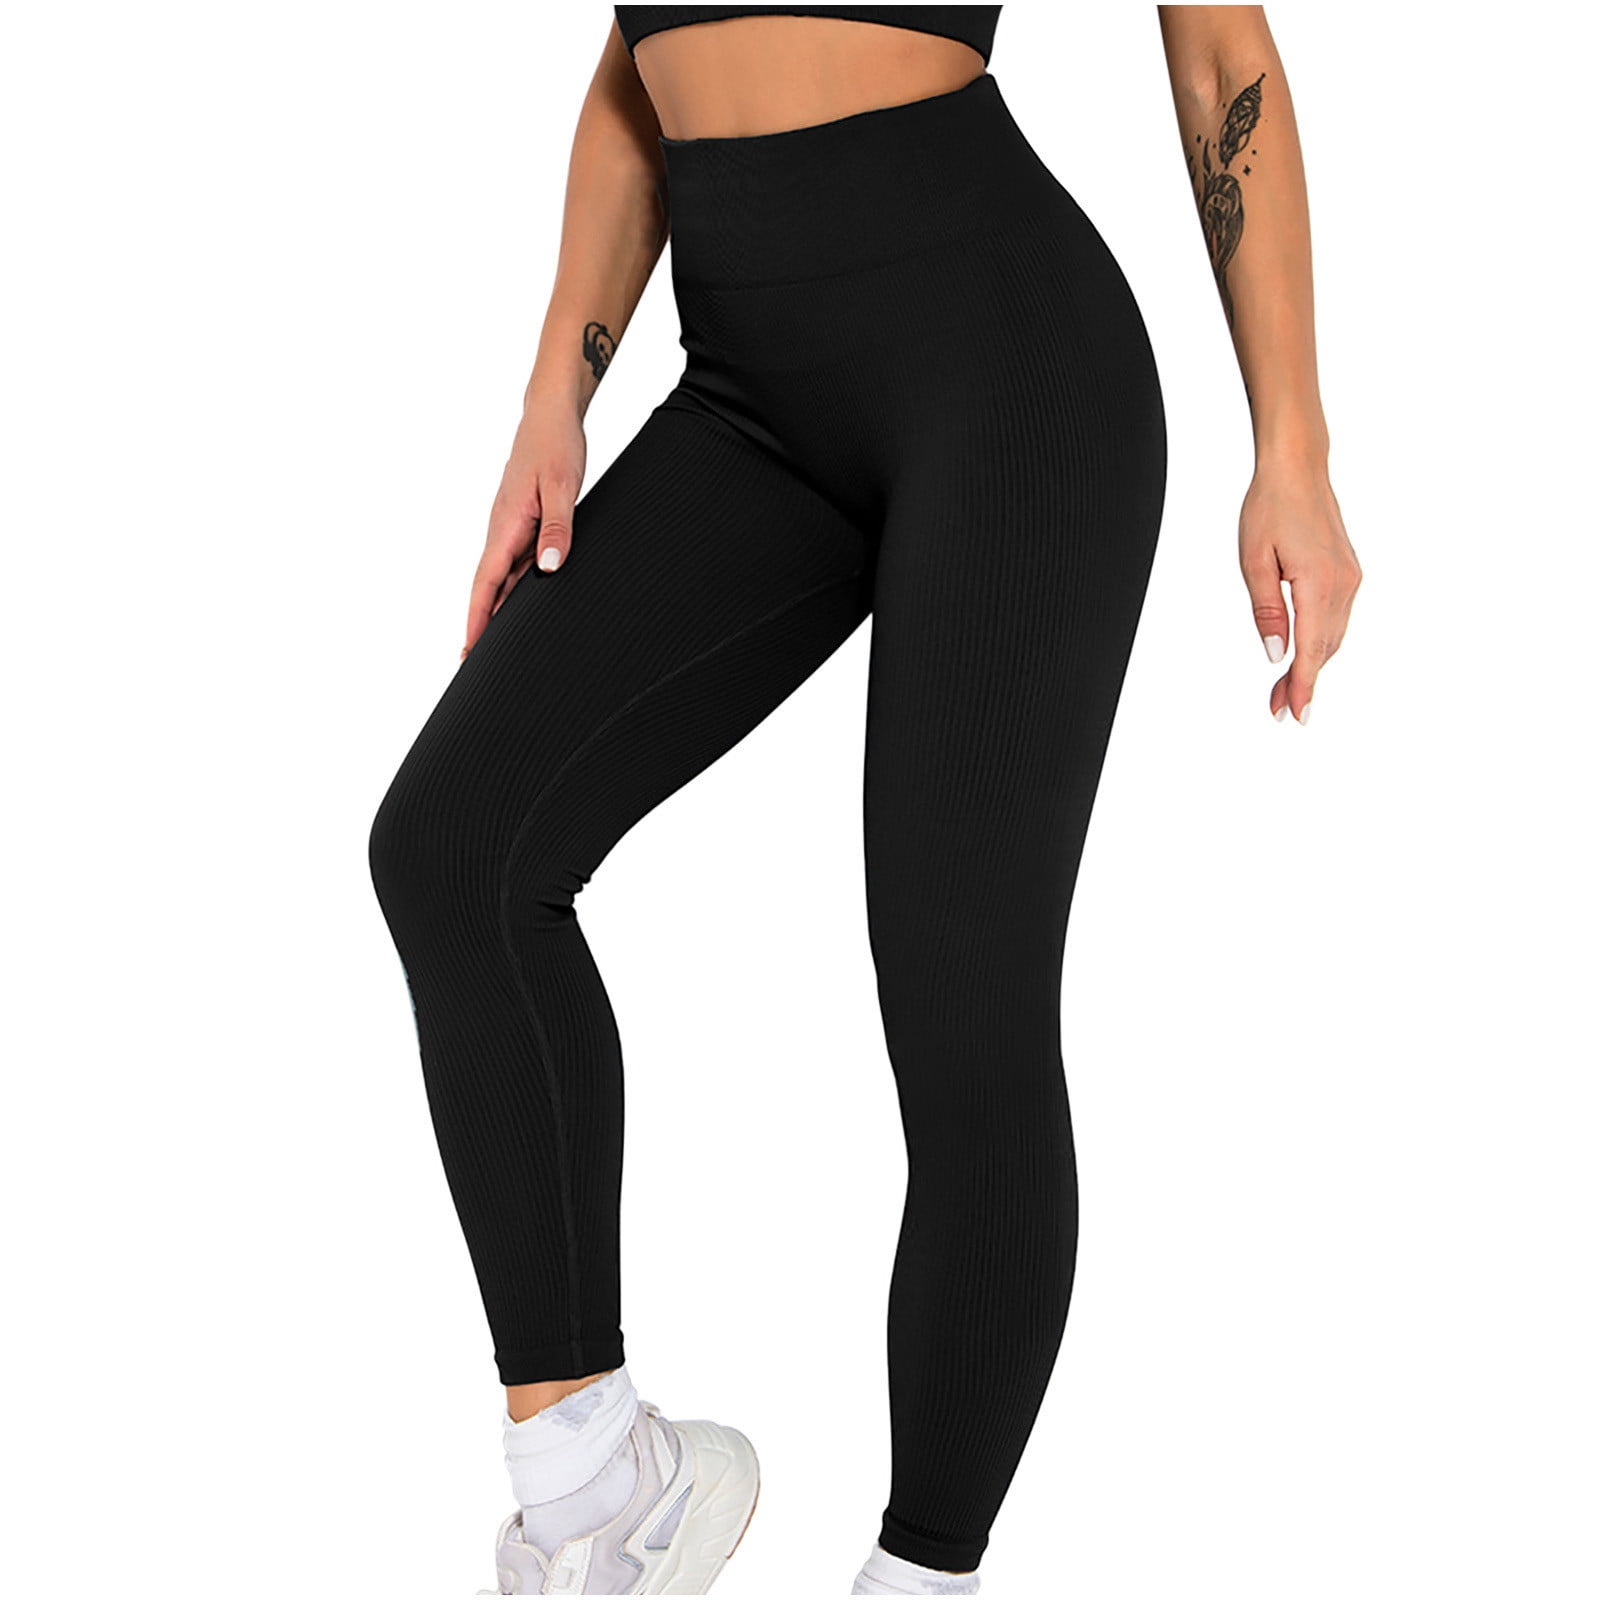 RQYYD Women's Yoga Leggings Ribbed Seamless Workout High Waist